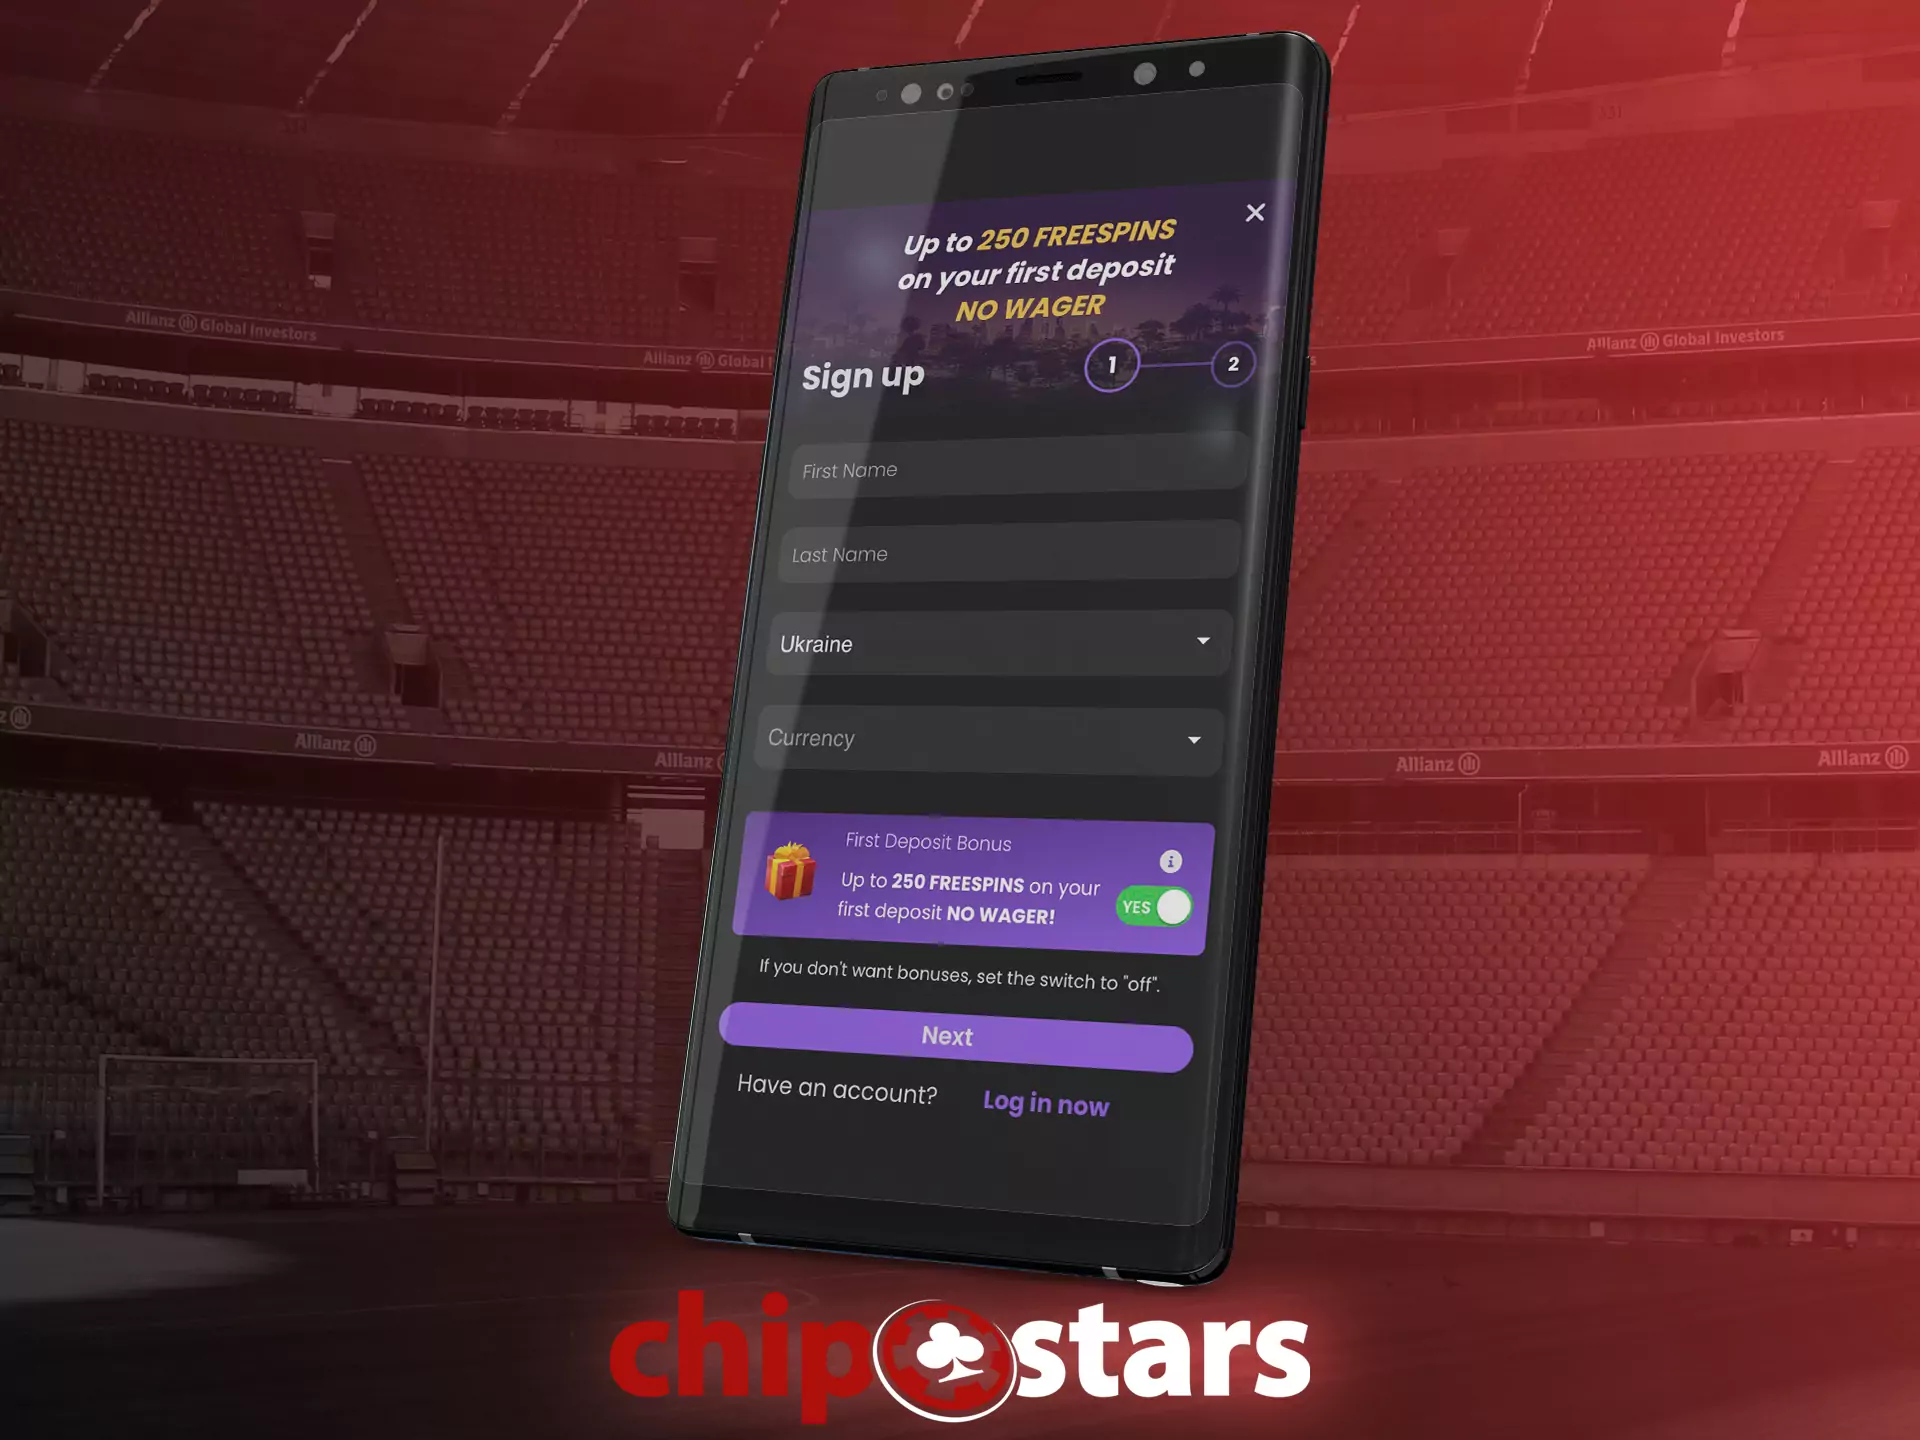 Fill in the fields to create an account on Chipstars.